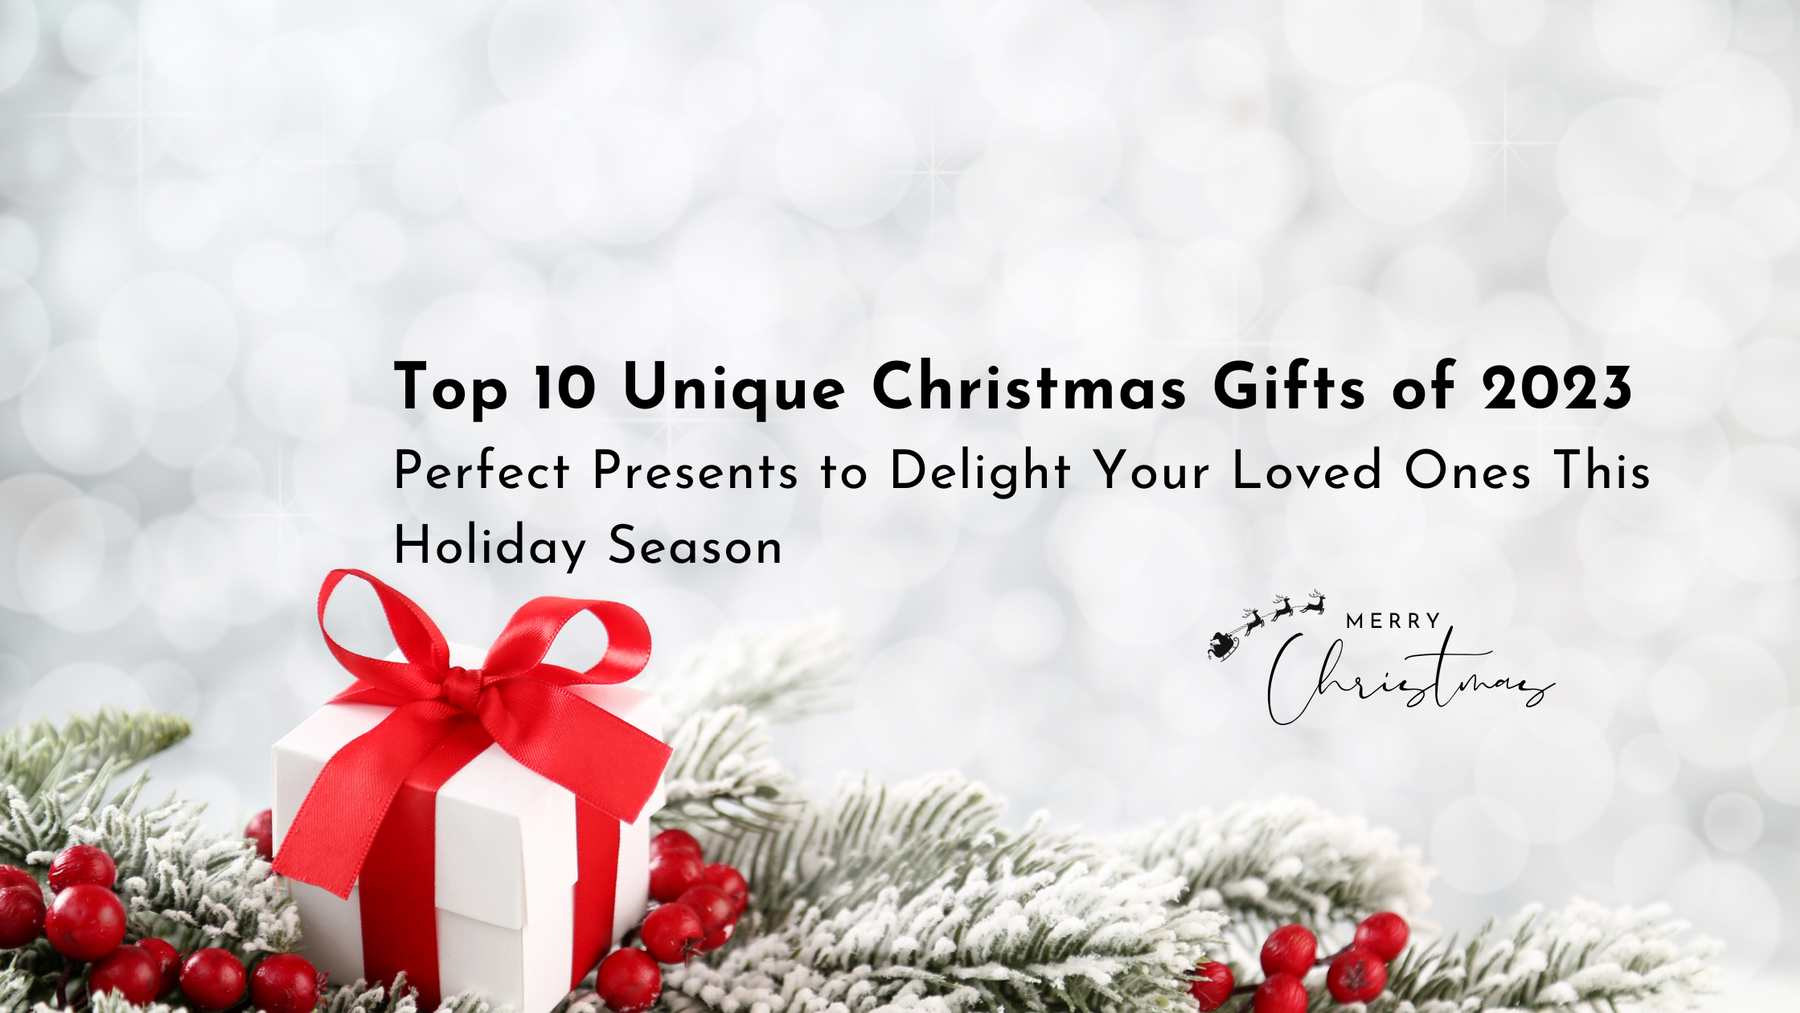 Top 10 Unique Christmas Gifts of 2023: Perfect Presents to Delight Your Loved Ones This Holiday Season